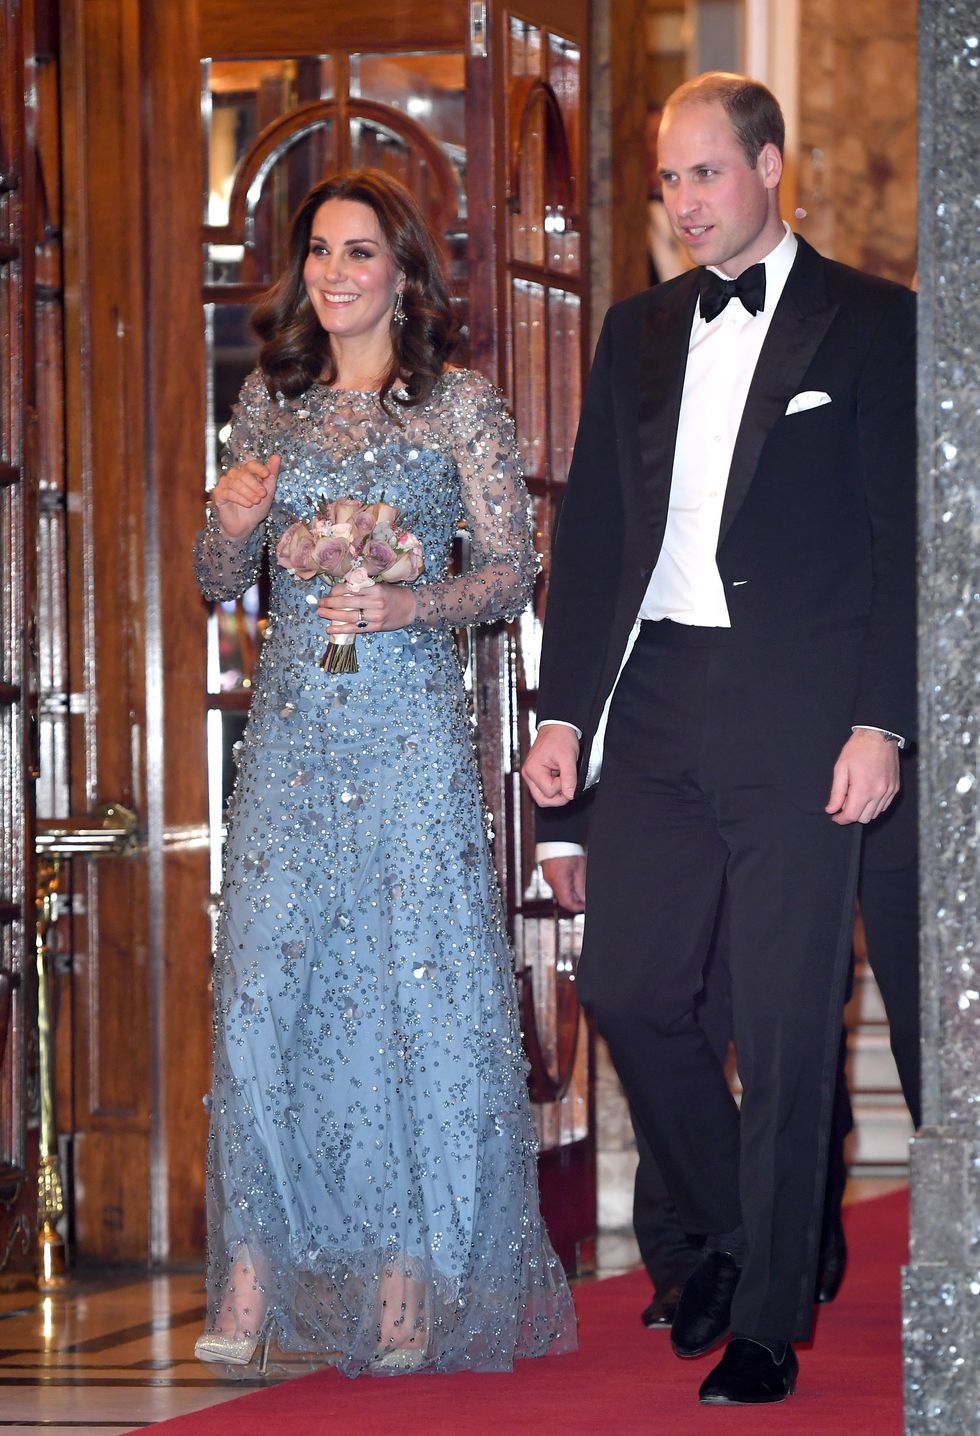 Duke and Duchess of Cambridge at the Royal Variety performance